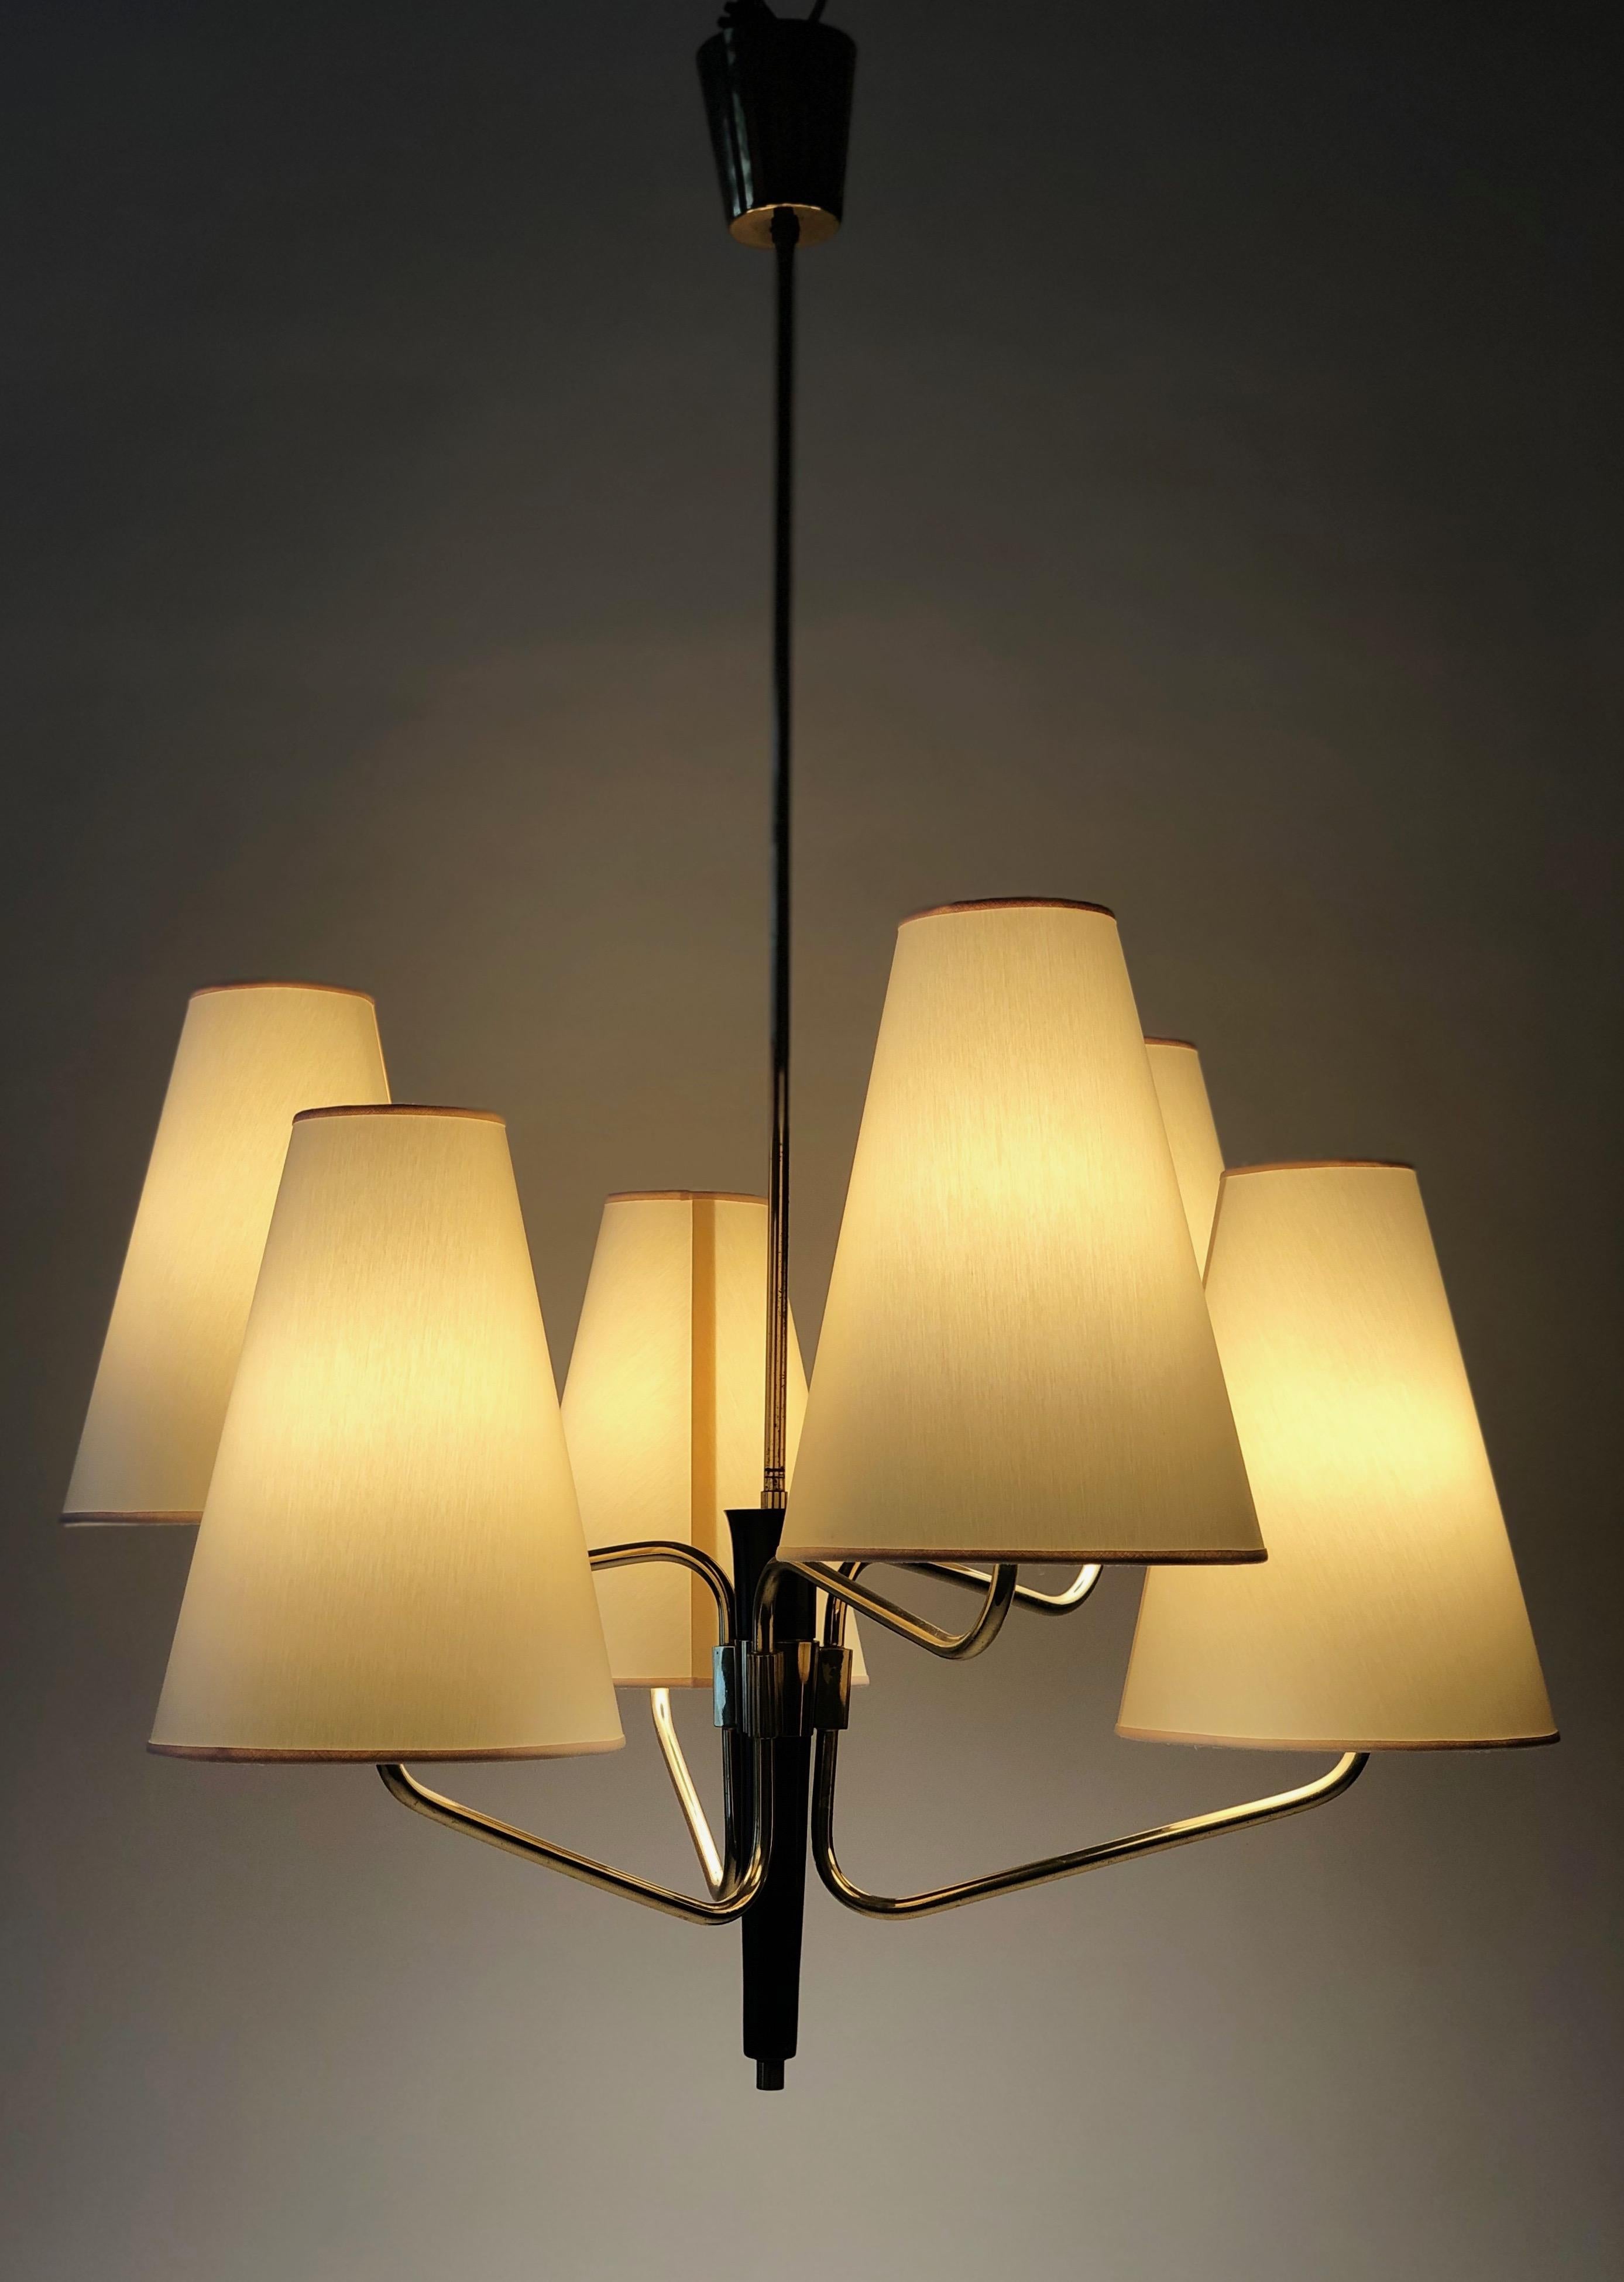 Midcentury Pendant Lamp in Brass from Rupert Nikoll, Austria with 6 Silk Shades For Sale 3